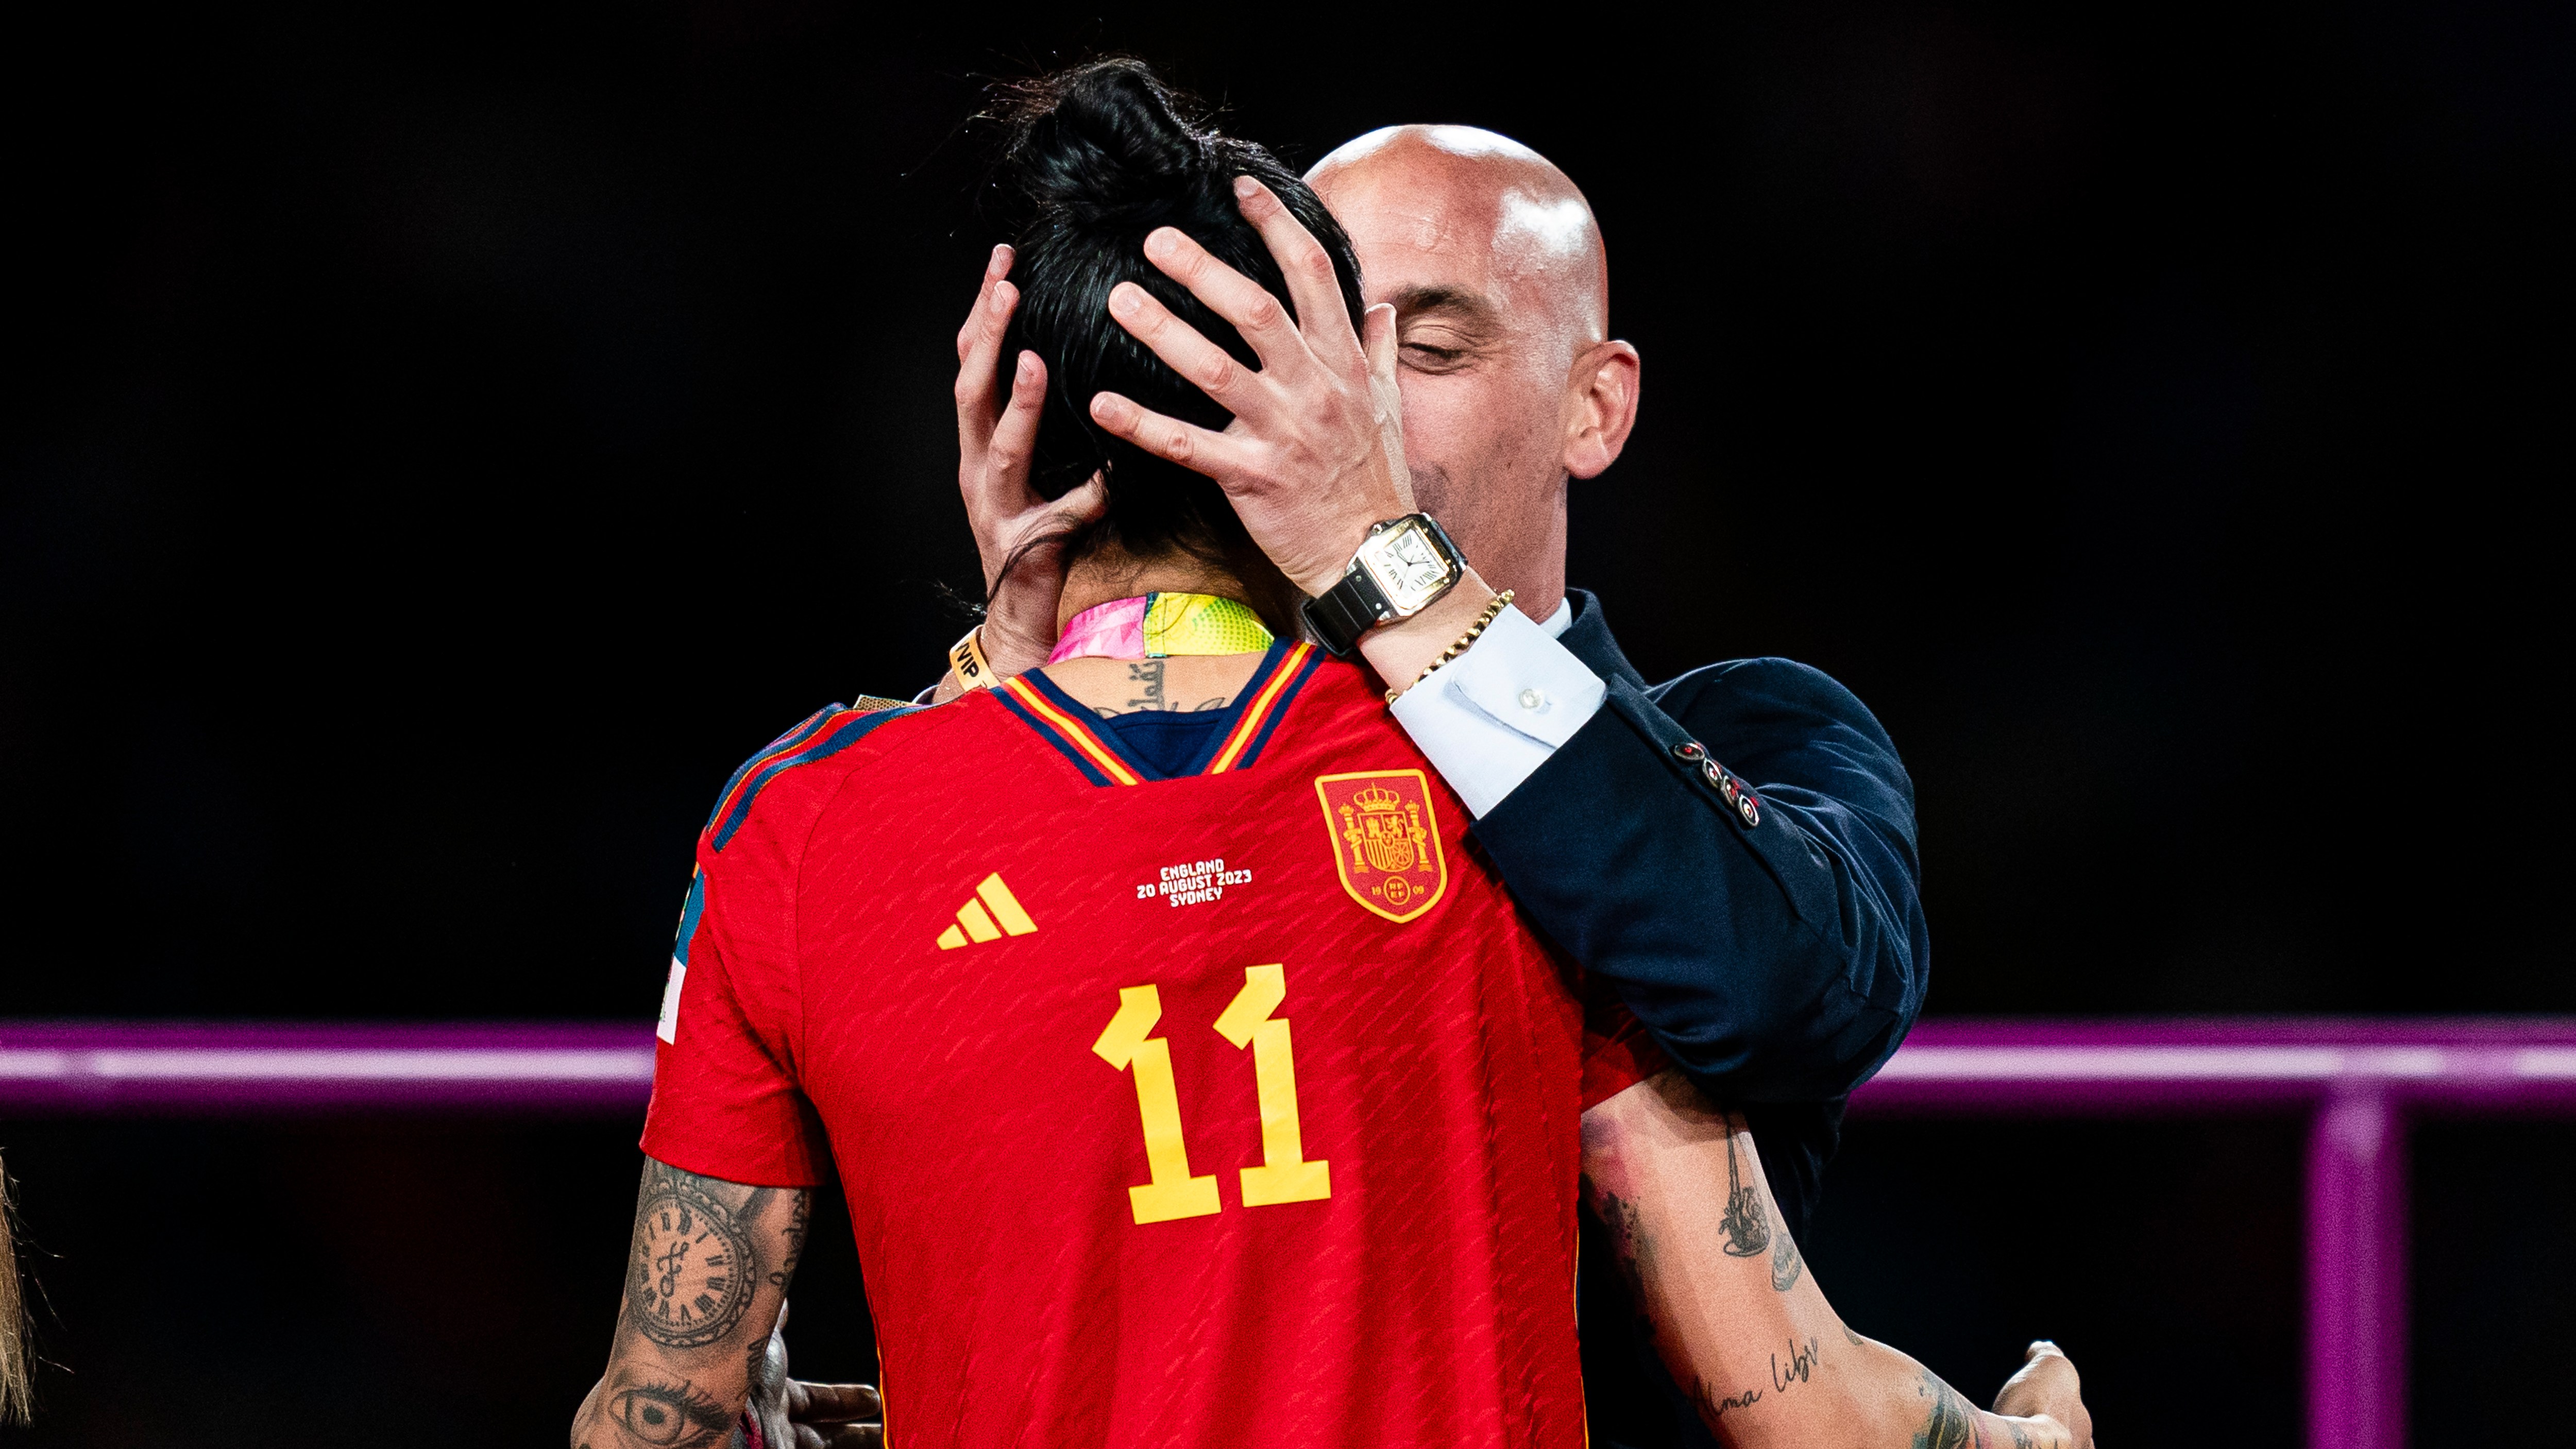 Rubiales kissed Hermoso at the Women’s World Cup final medal presentation ceremony